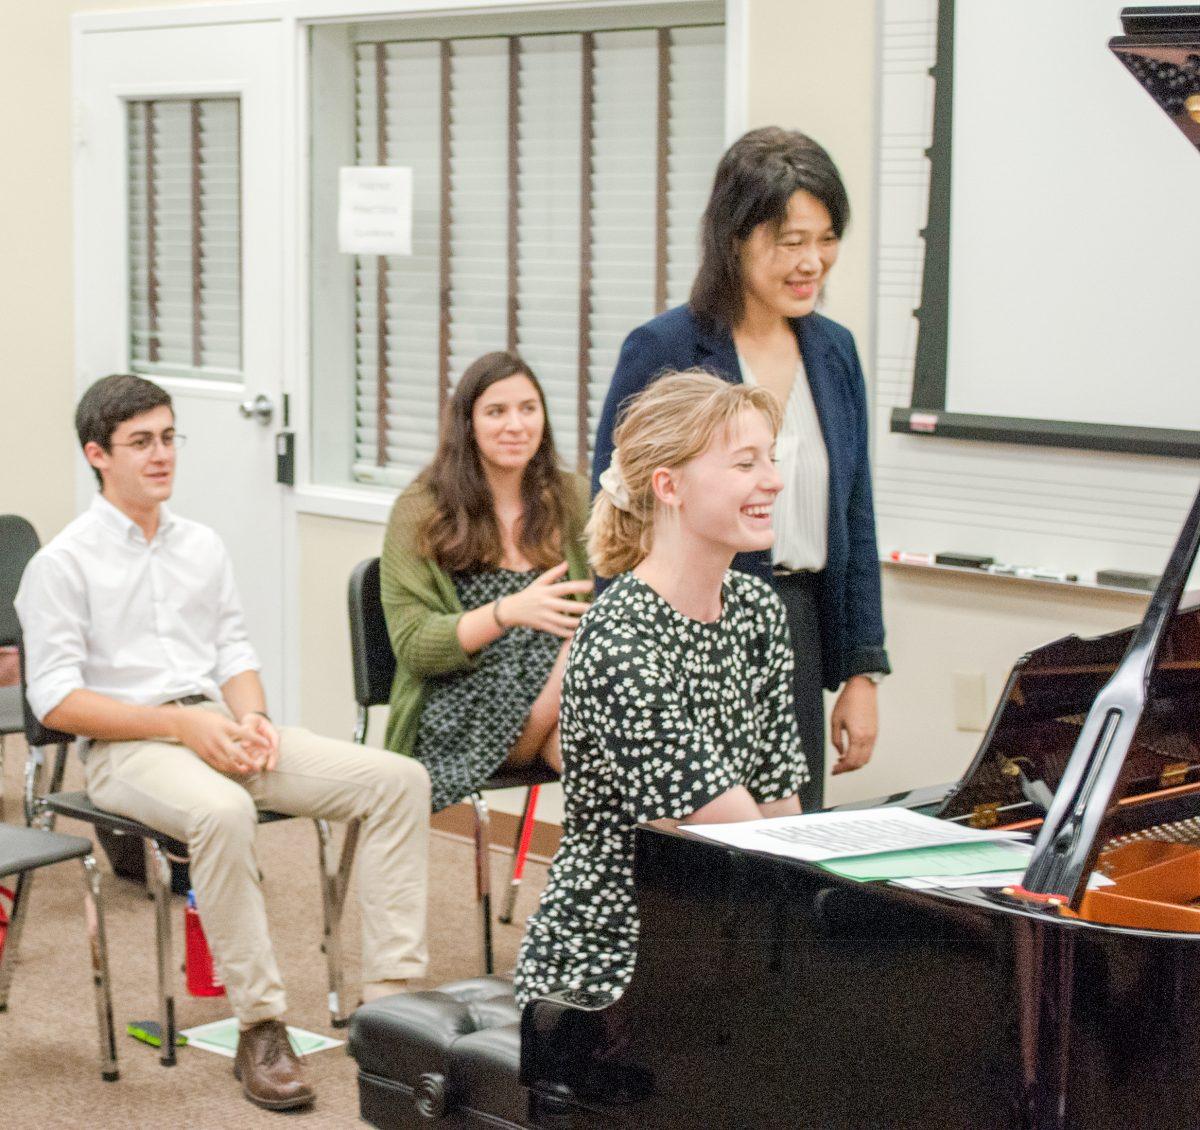 Austin Sbarra ’18, Daisy Abrams ’19 and Jenny Nessel ’19 work with pianist Yoshimi Yomauchi at the master class held in the fall 2017 semester (Photo by Chris Fastiggi ’18, courtesy of University Communications).